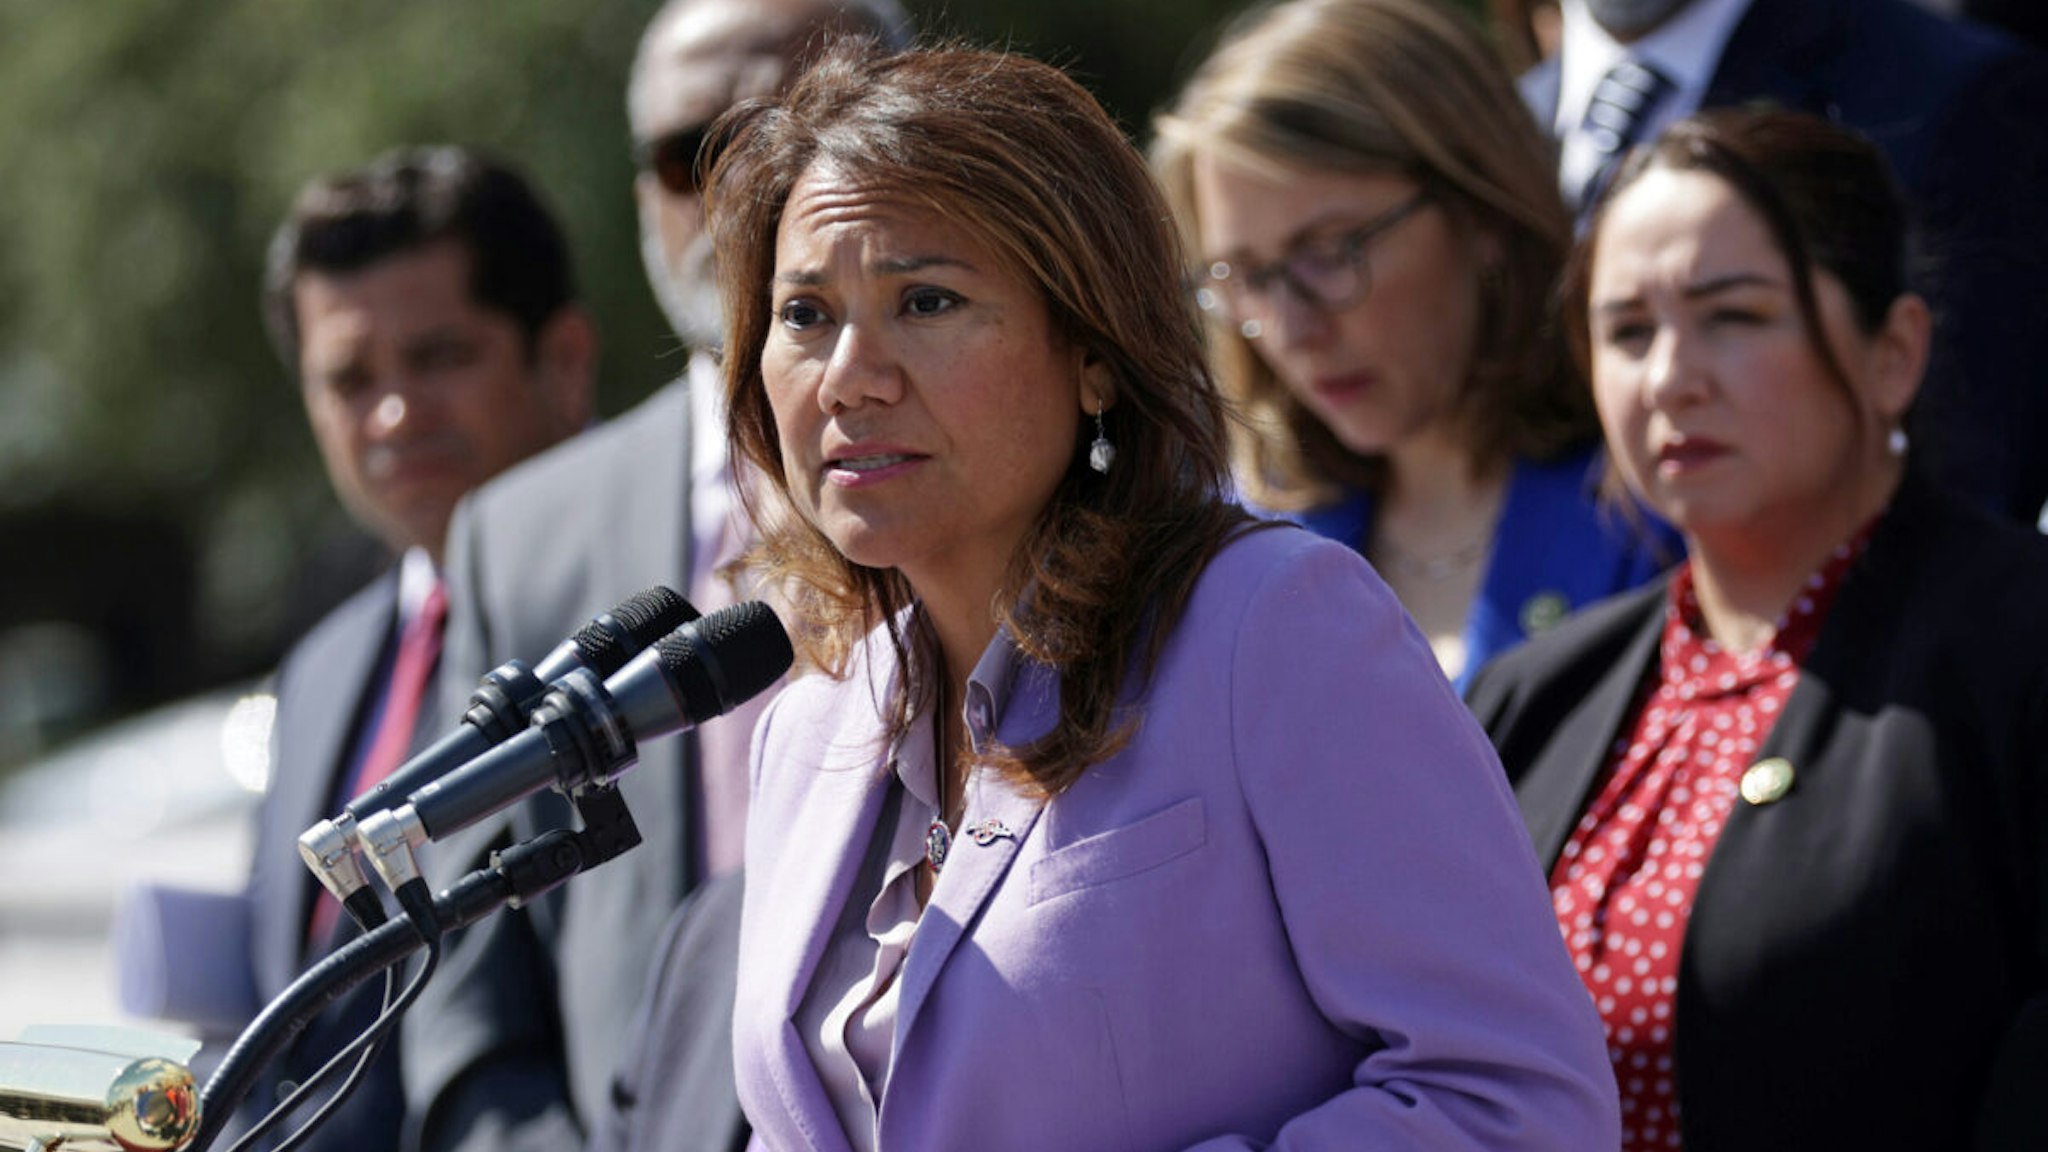 U.S. Rep. Veronica Escobar (D-TX) speaks as House Democrats gather for an event on gun violence at the East Front of the U.S. Capitol on March 29, 2023 in Washington, DC.